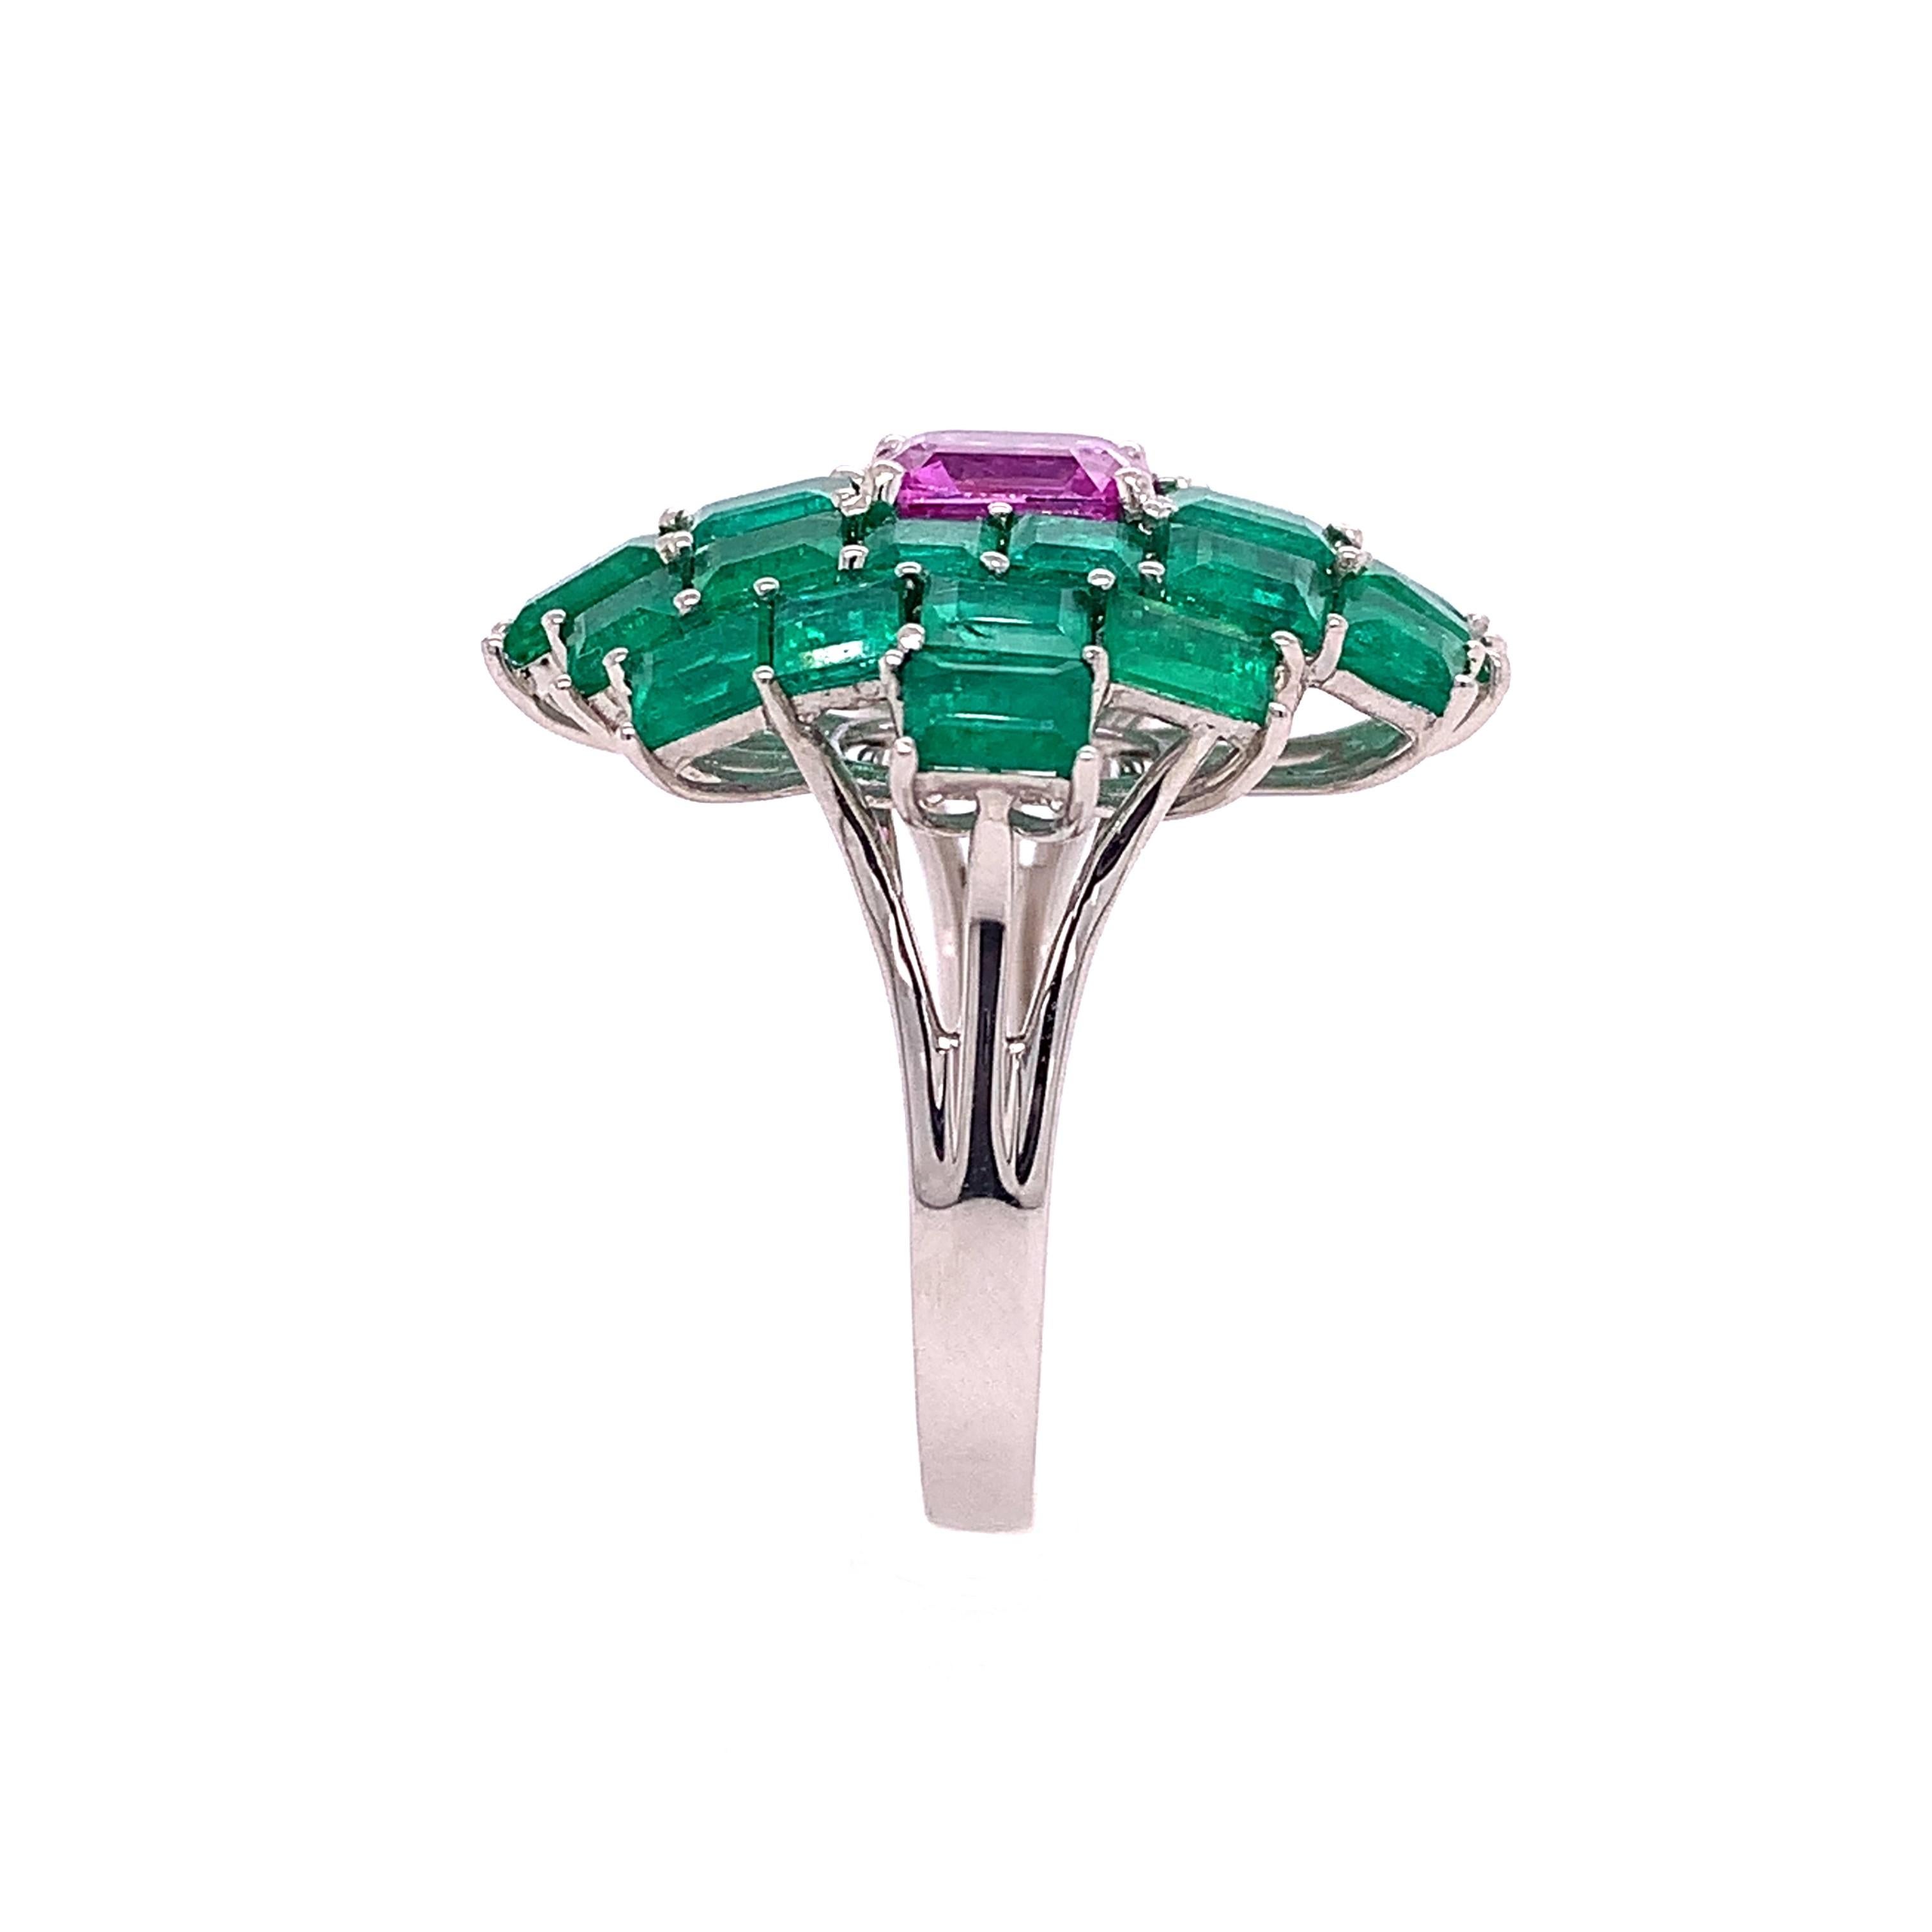 18K White Gold
Emerald: 4.45ct total weight.
Pink Sapphire: 1.25ct total weight.